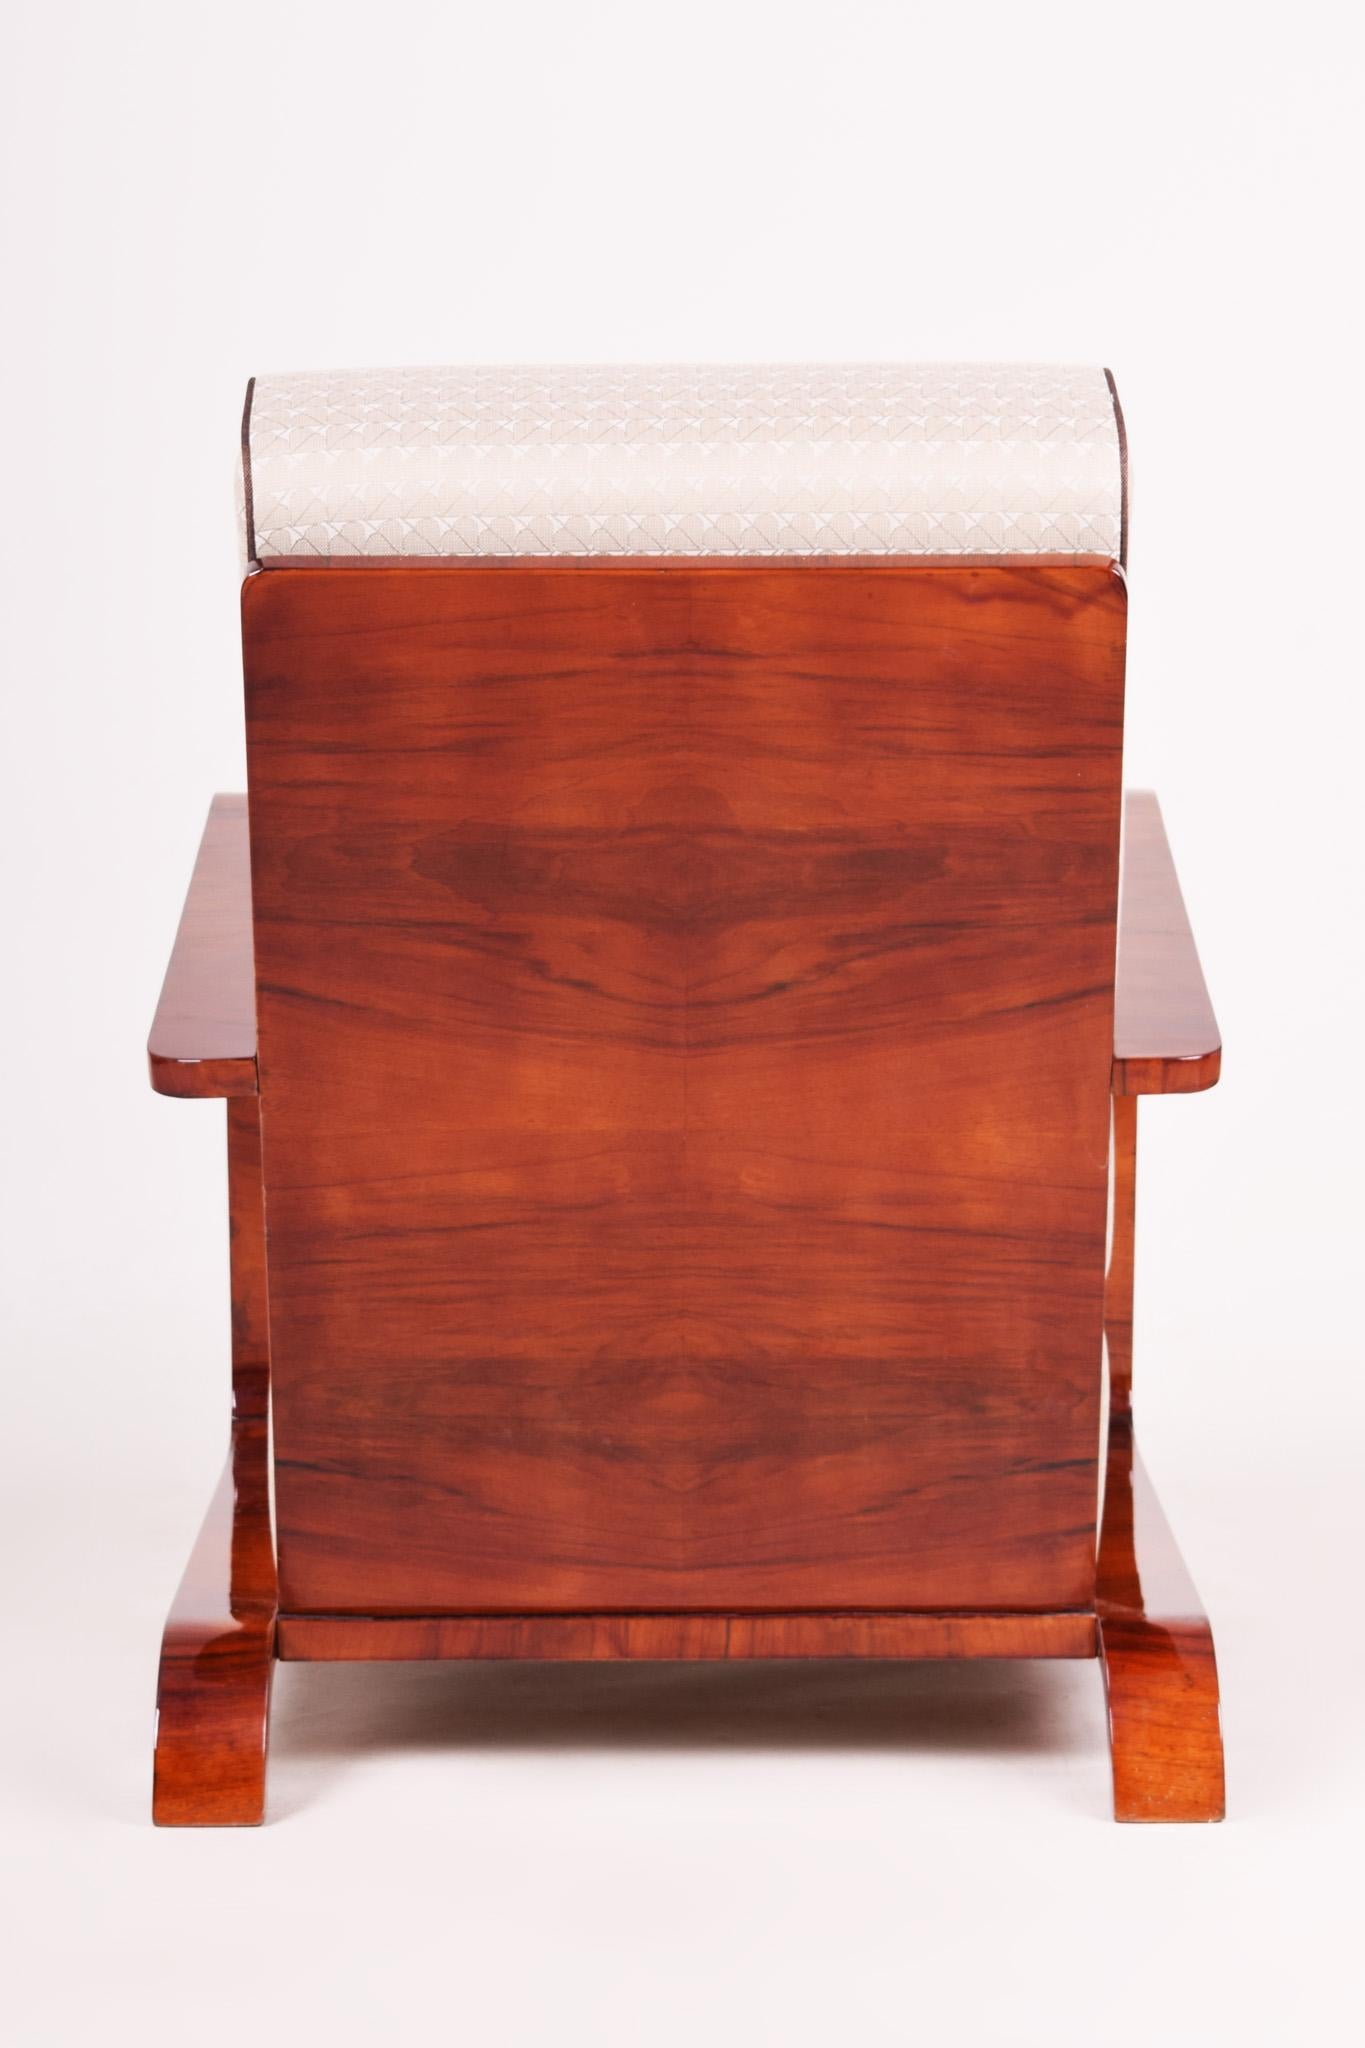 Fabric White Art Deco Armchair from Czechia, 1920s, Walnut, Restored Upholstery For Sale